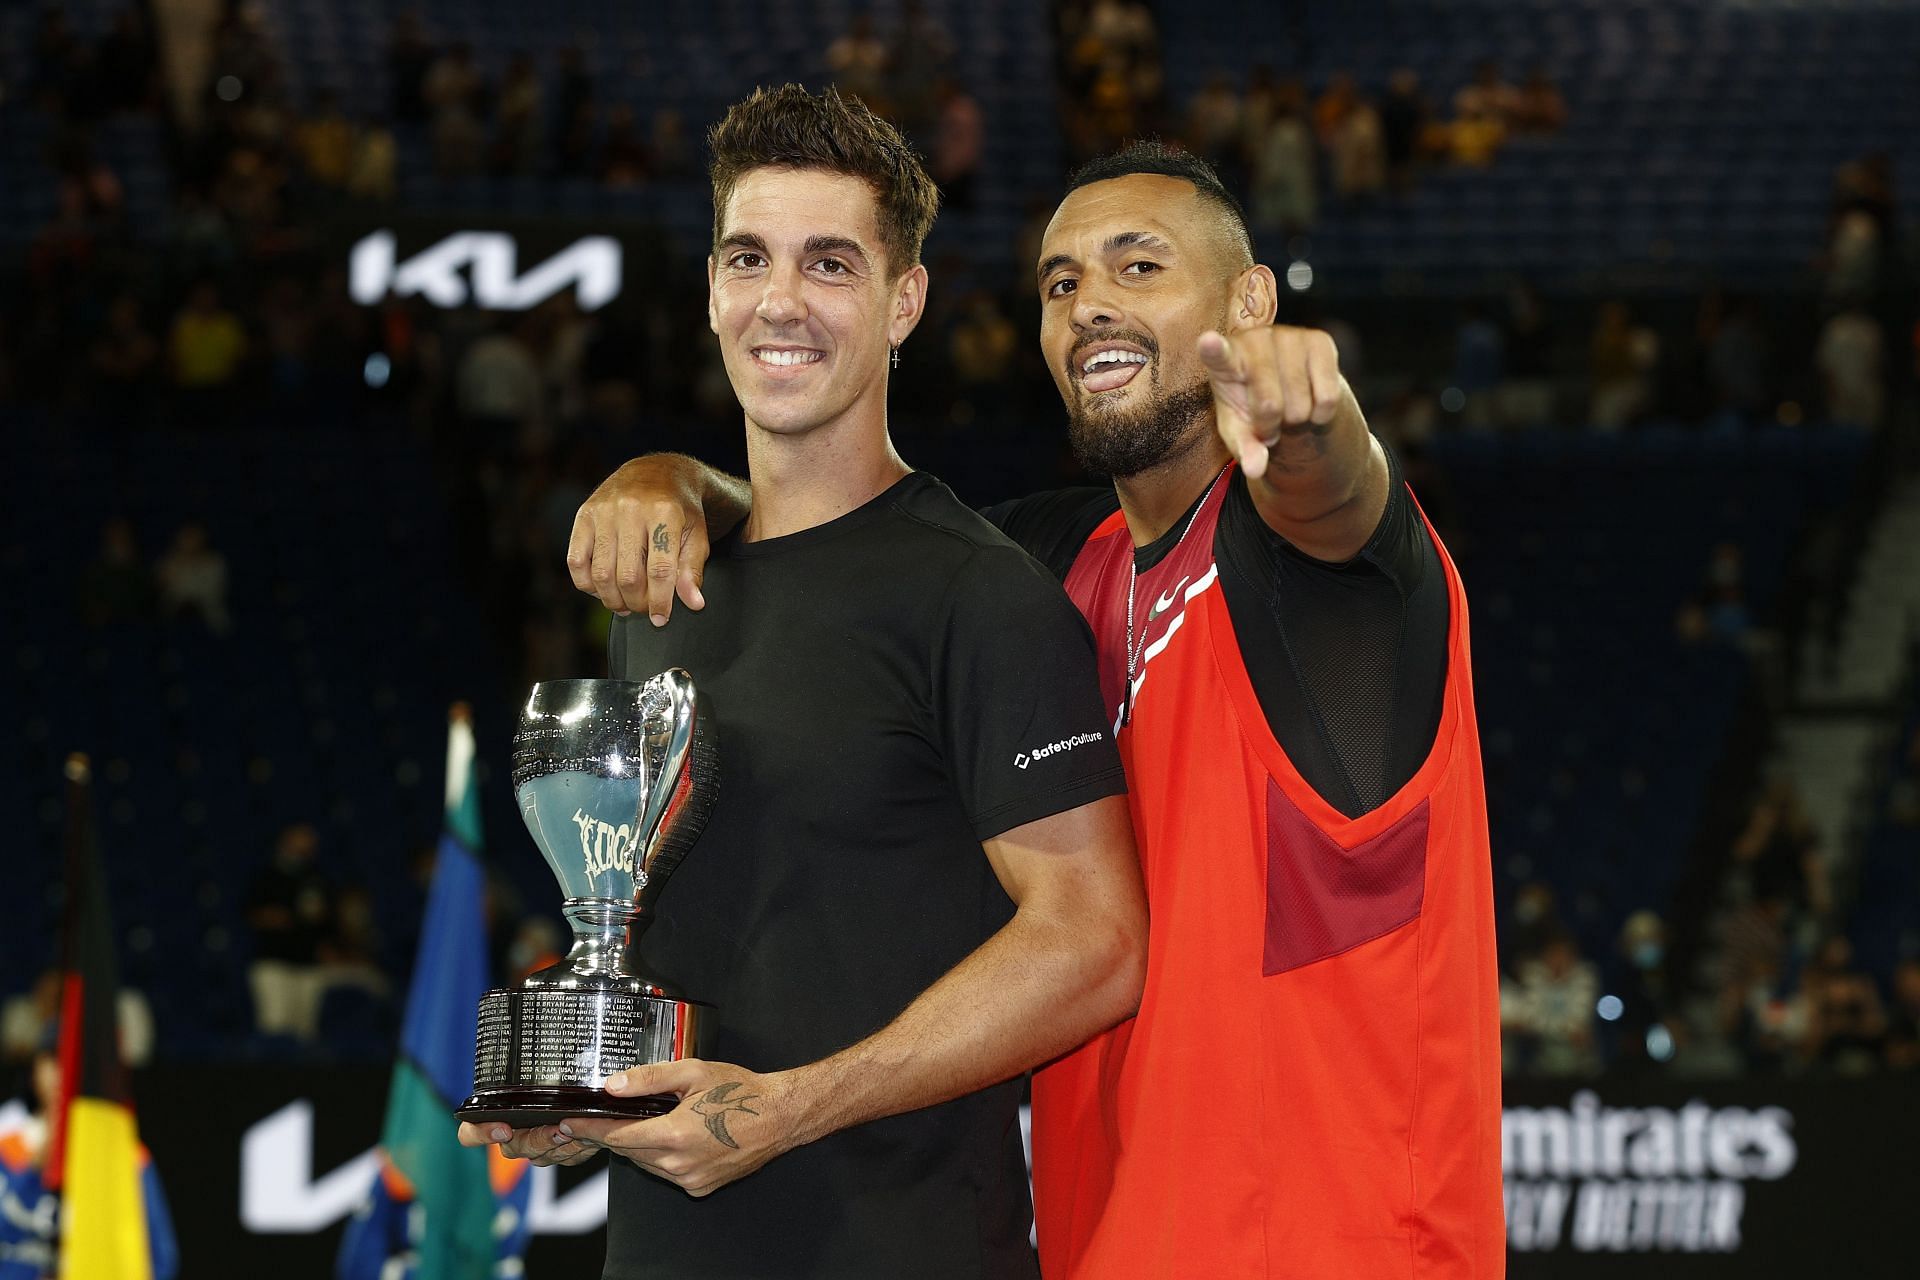 Thanasi Kokkinakis (L) won the doubles title at the 2022 Australian Open with Nick Kyrgios.